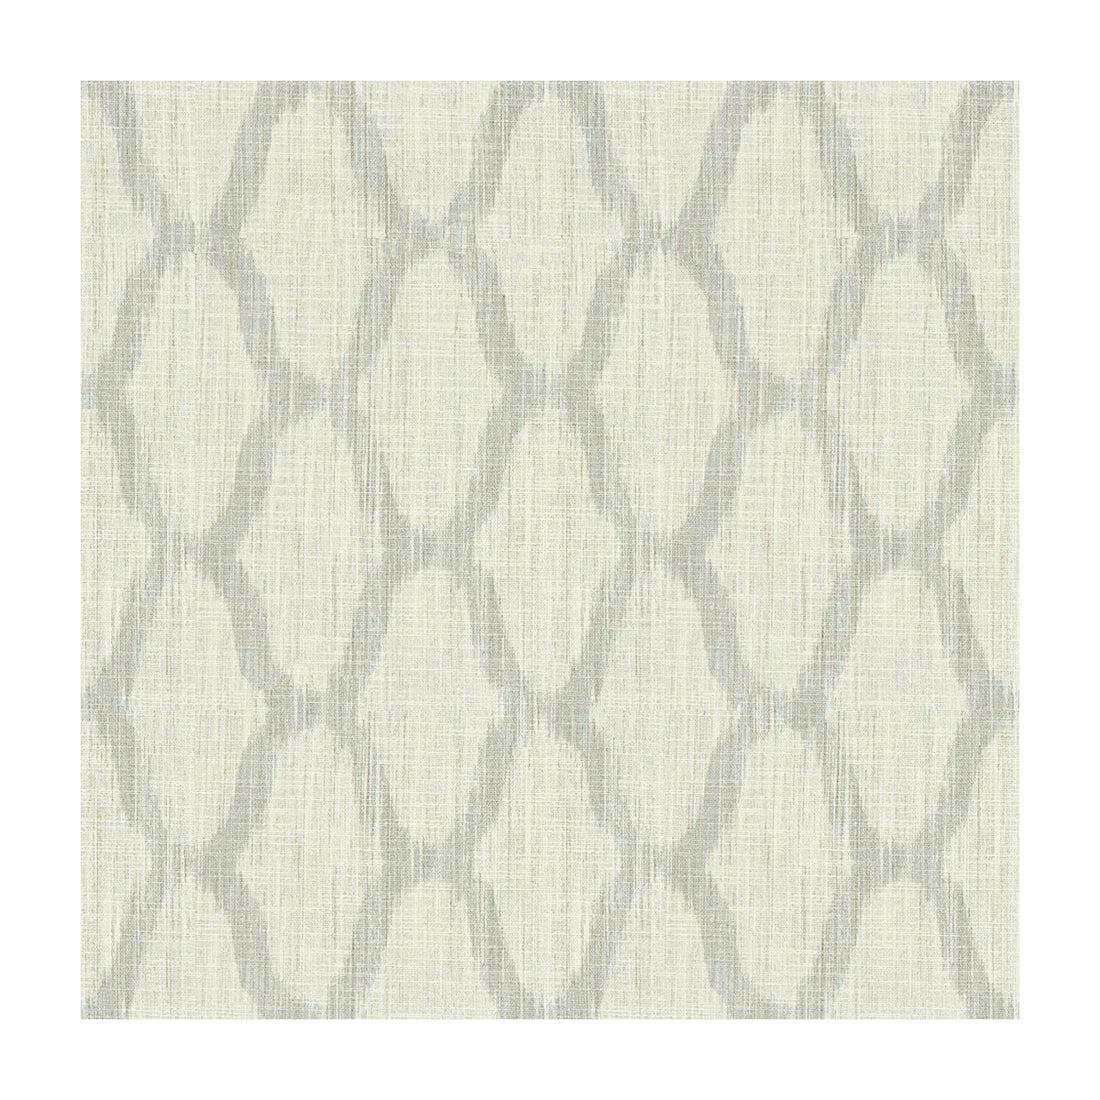 Snowhaven fabric in icecap color - pattern SNOWHAVEN.16.0 - by Kravet Couture in the Barbara Barry Chalet collection